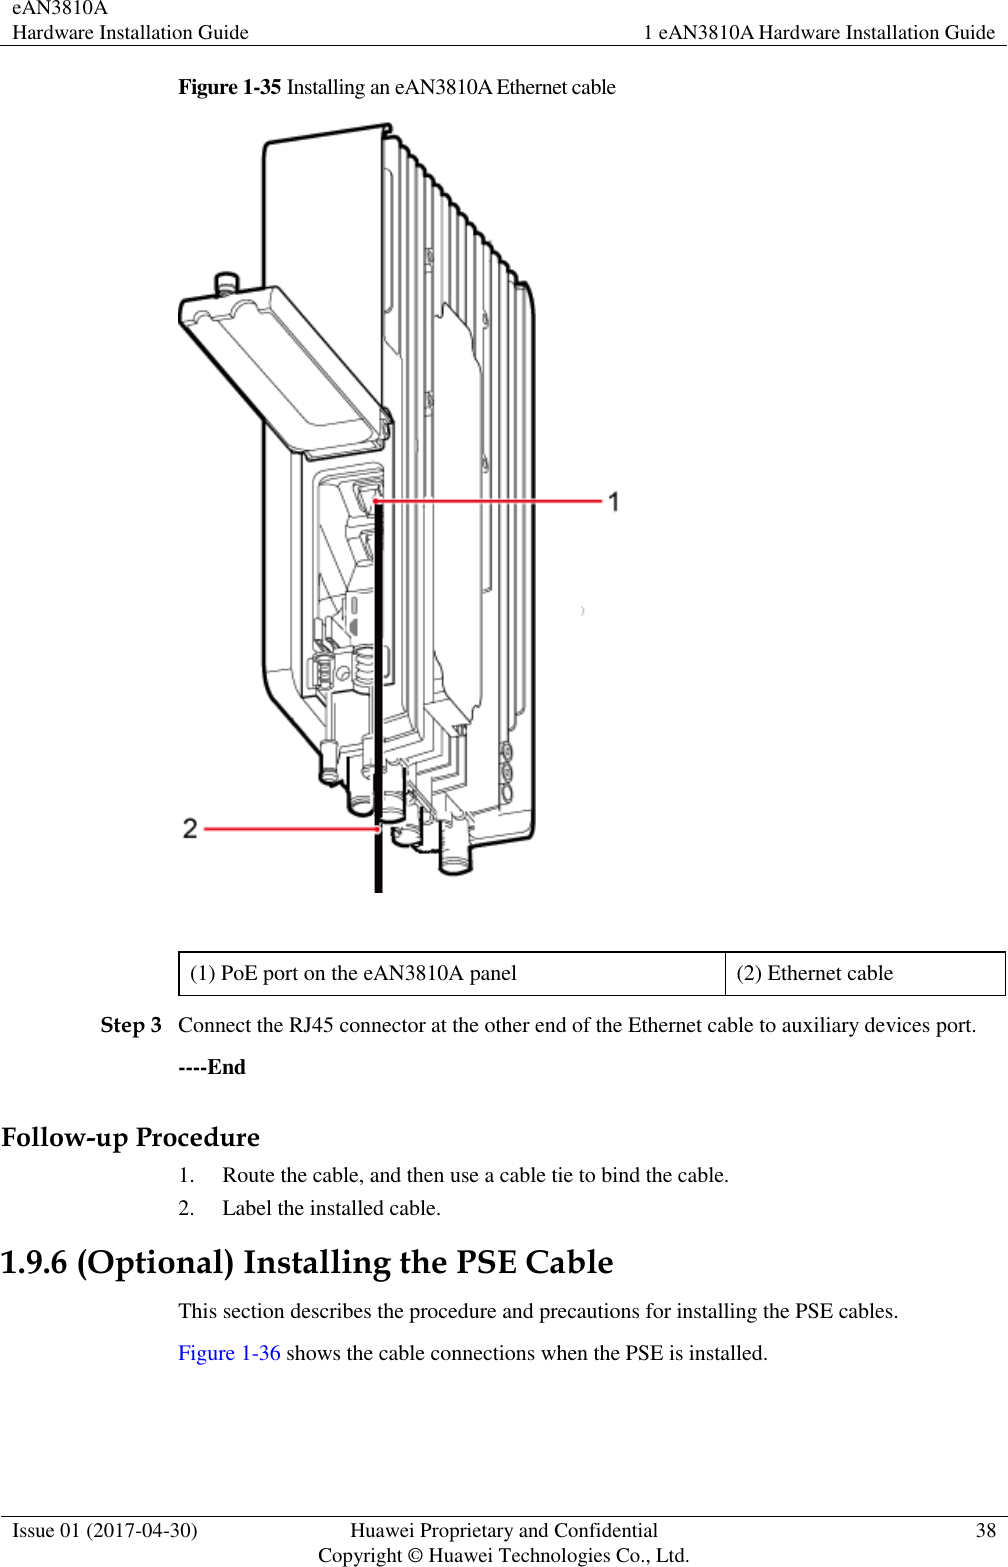 eAN3810A   Hardware Installation Guide 1 eAN3810A Hardware Installation Guide  Issue 01 (2017-04-30) Huawei Proprietary and Confidential                                     Copyright © Huawei Technologies Co., Ltd. 38  Figure 1-35 Installing an eAN3810A Ethernet cable     (1) PoE port on the eAN3810A panel (2) Ethernet cable Step 3 Connect the RJ45 connector at the other end of the Ethernet cable to auxiliary devices port. ----End Follow-up Procedure 1. Route the cable, and then use a cable tie to bind the cable. 2. Label the installed cable. 1.9.6 (Optional) Installing the PSE Cable This section describes the procedure and precautions for installing the PSE cables. Figure 1-36 shows the cable connections when the PSE is installed. 